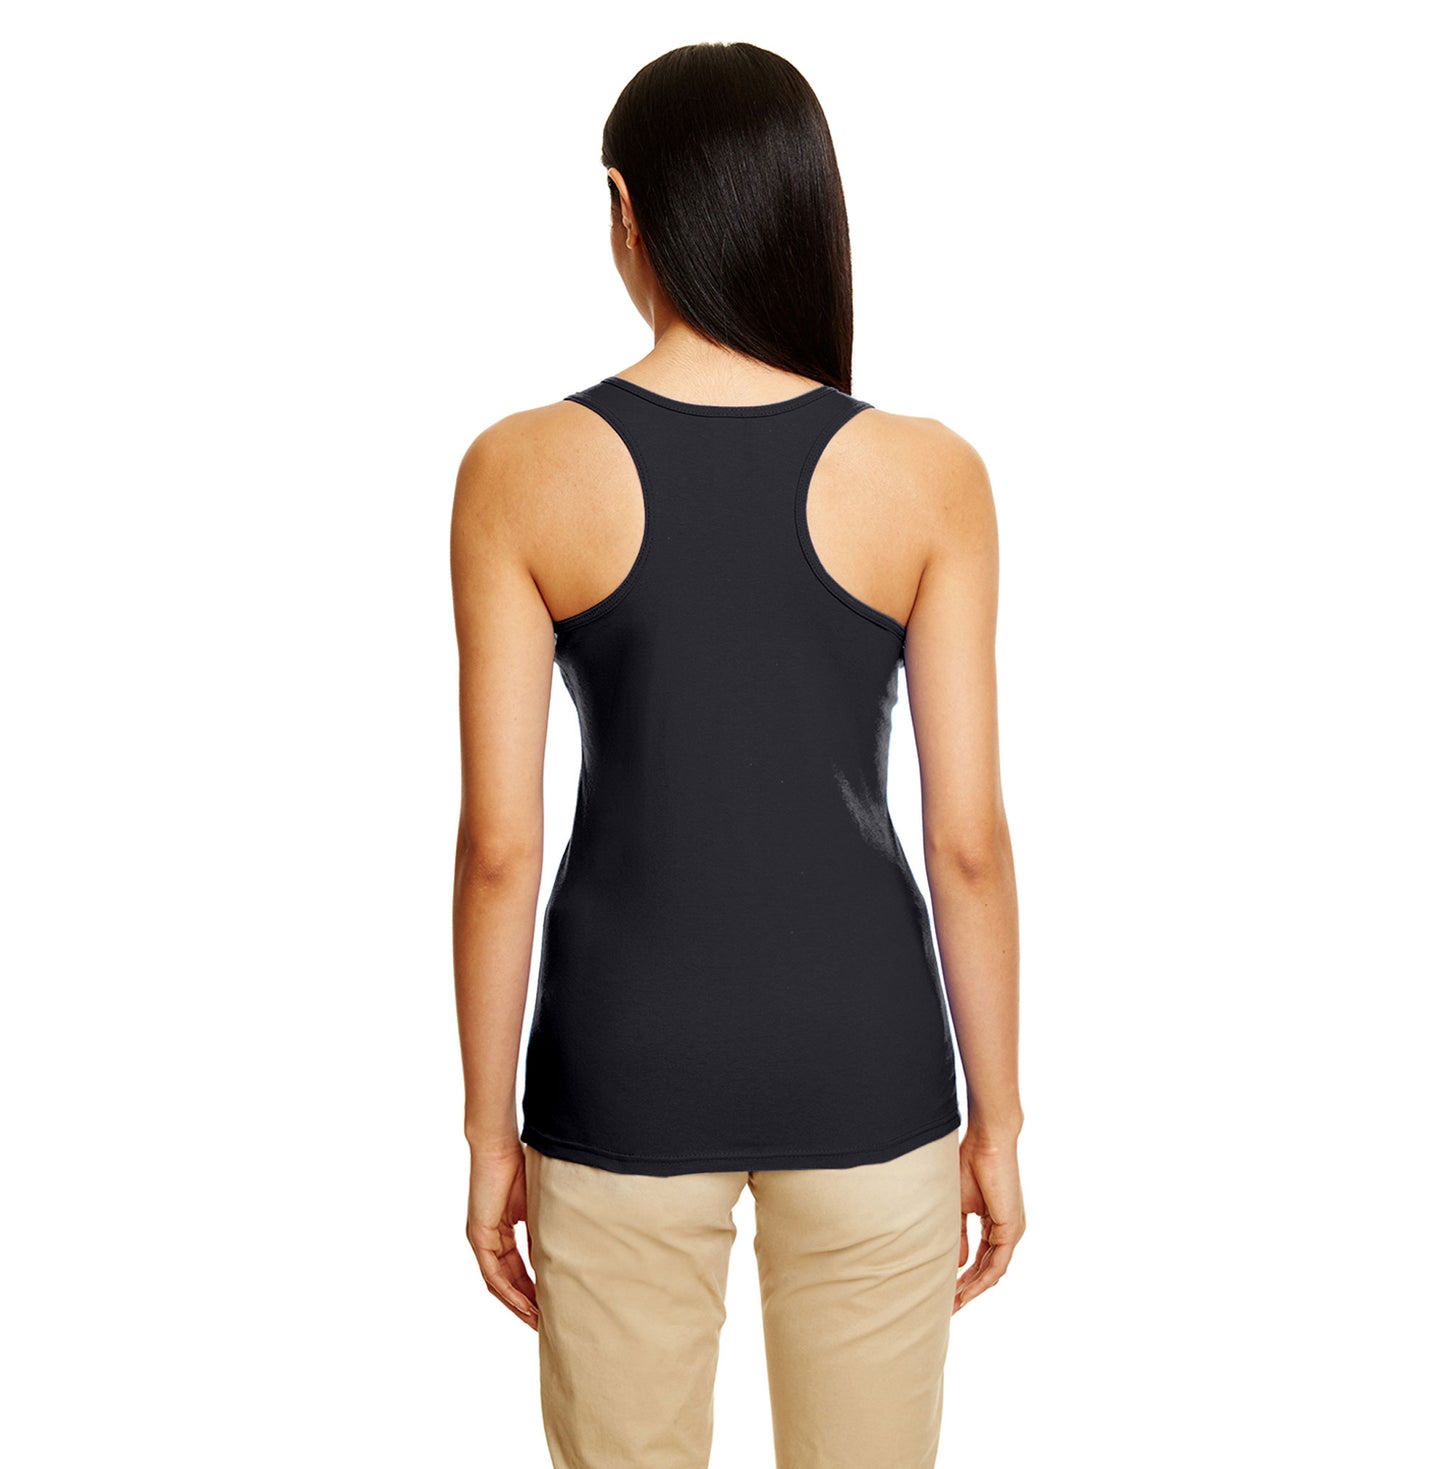 Flower Stampede Racerback Tank is cut to accentuate your shoulders.